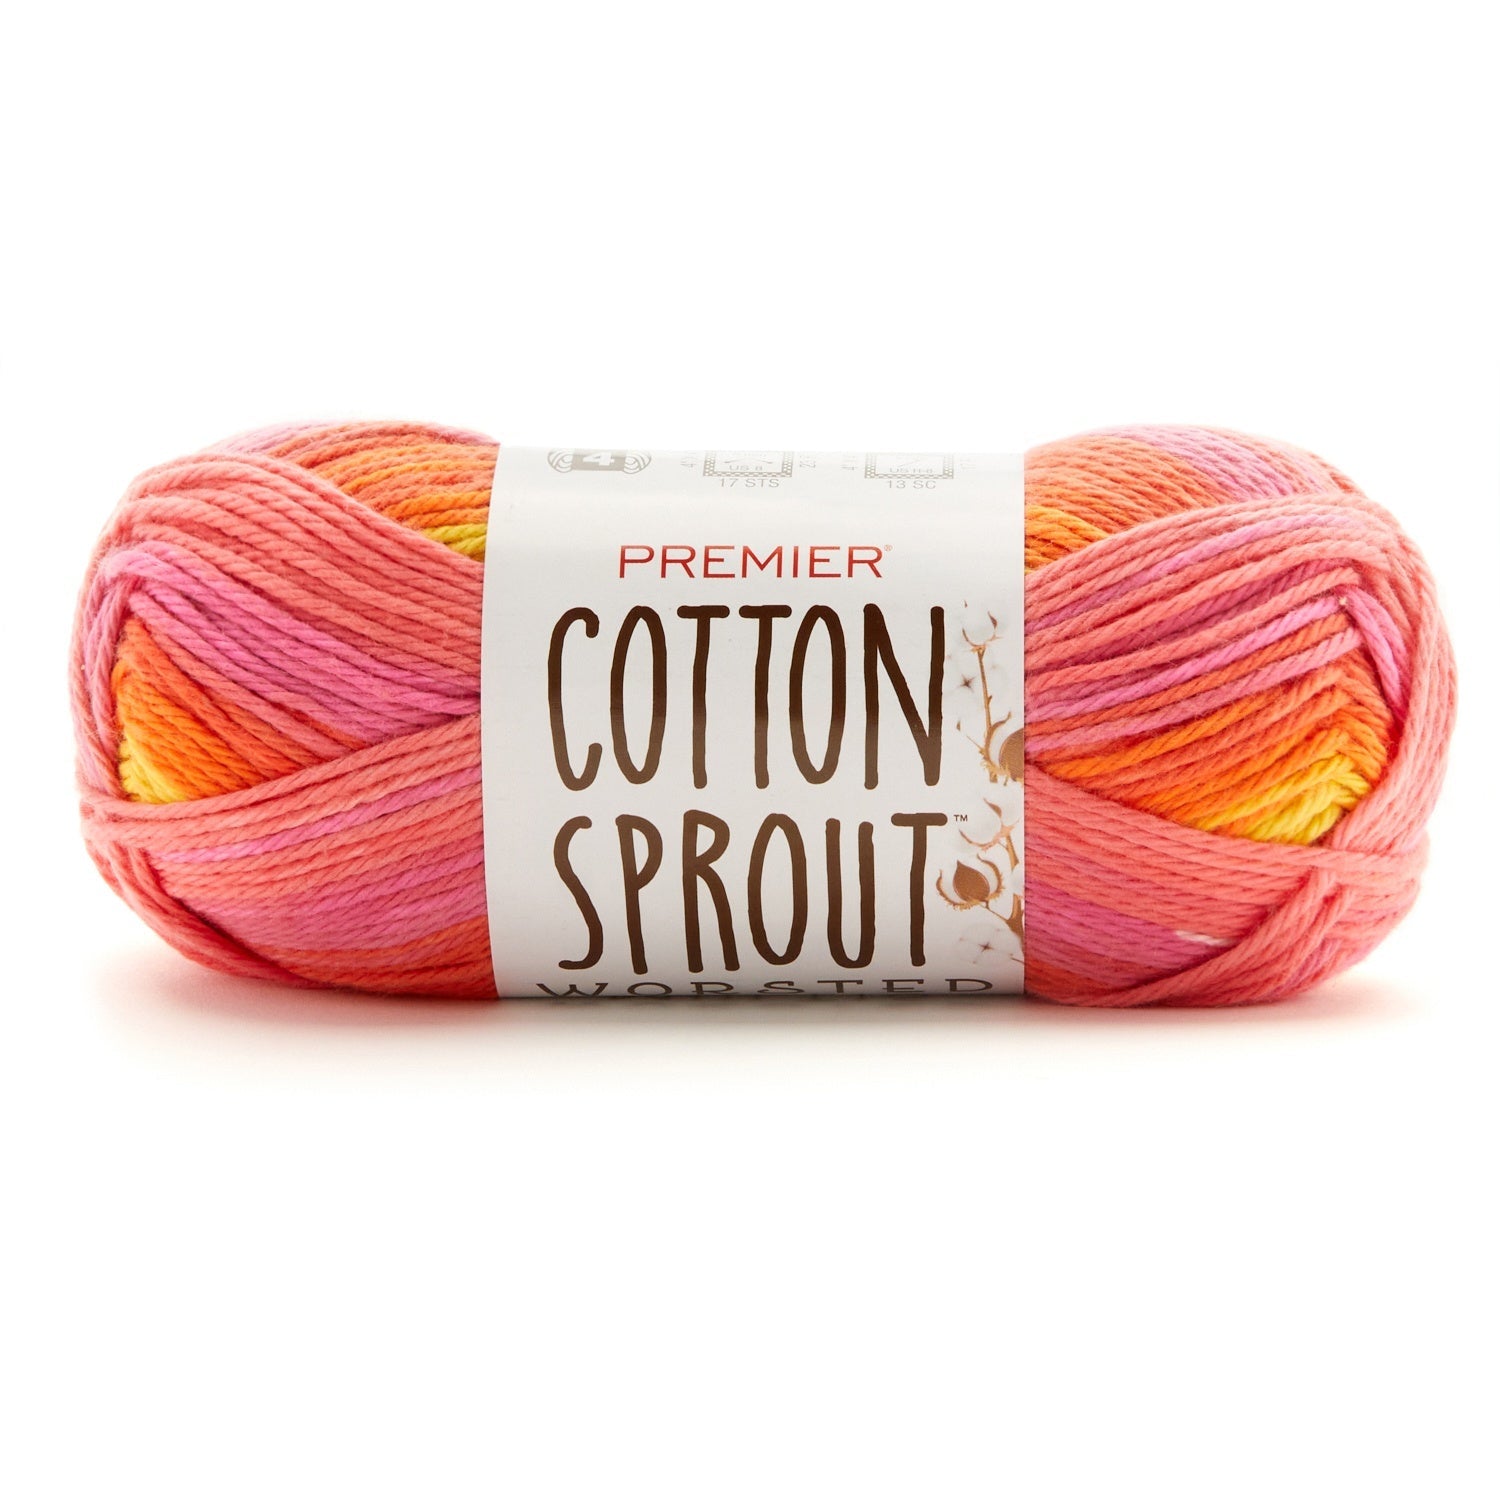 Premier cotton sprout worsted multi yarn - 11